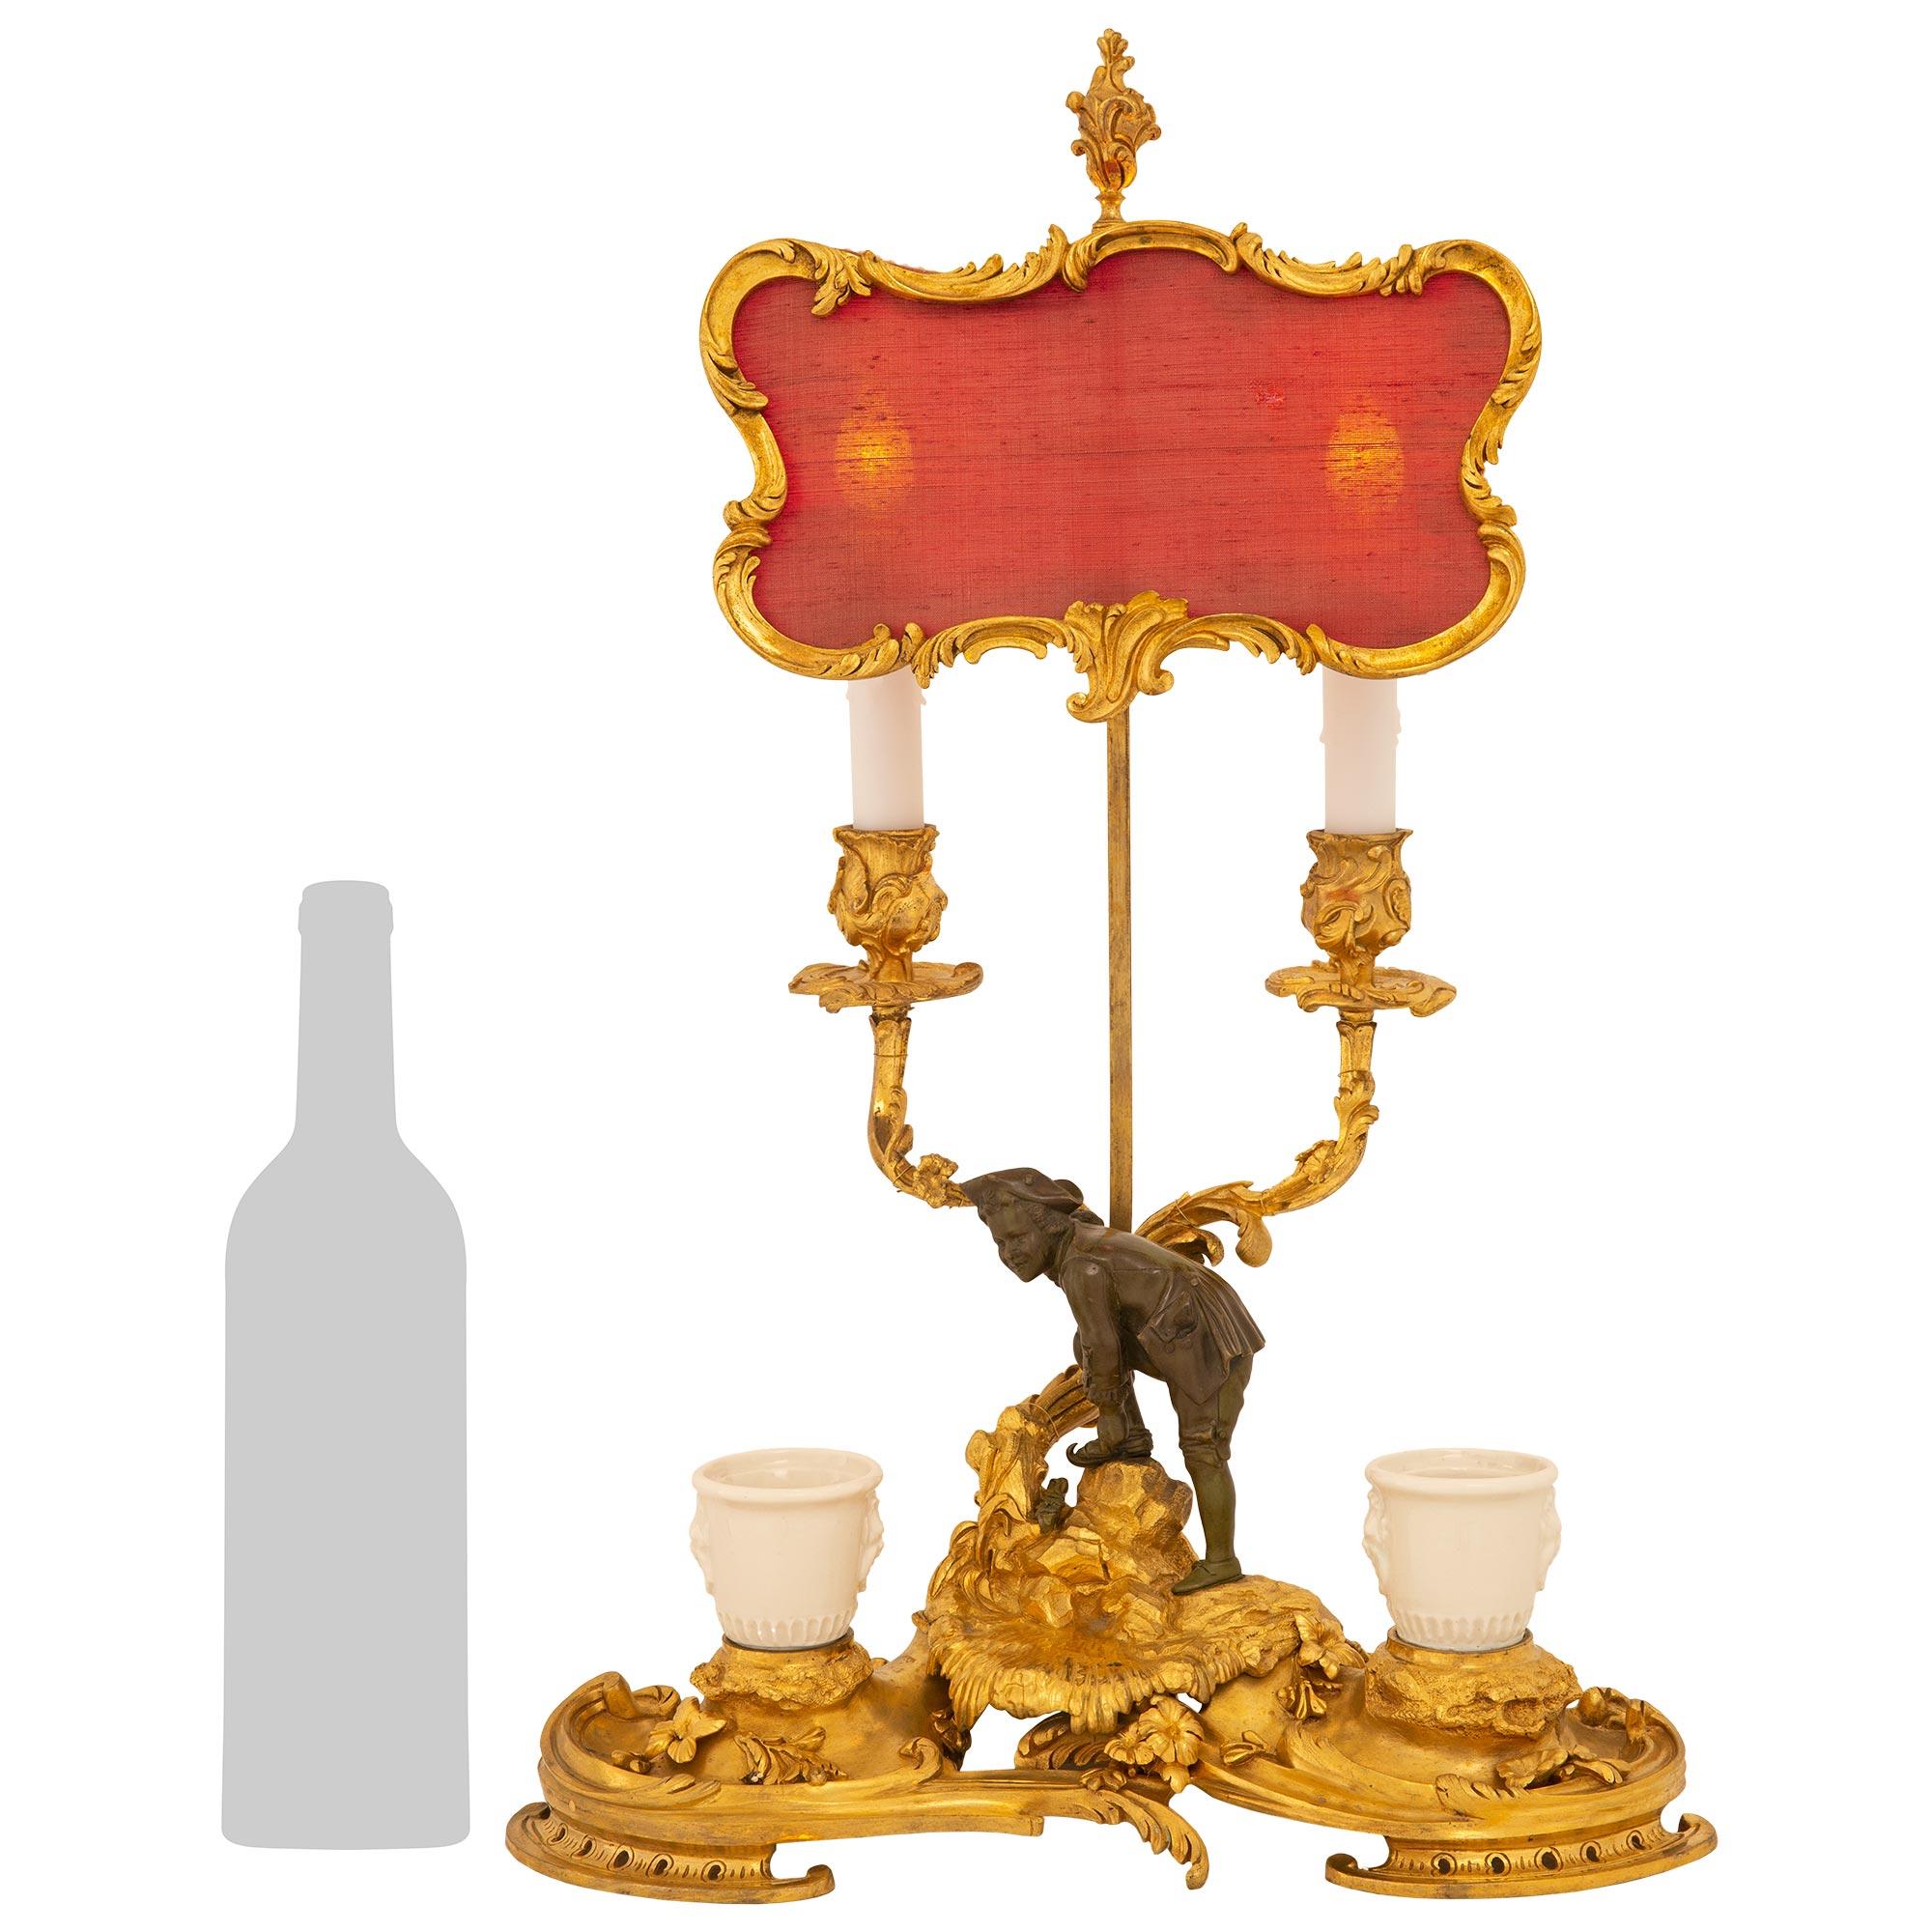 A unique and elegant French mid-19th century Louis XV st. ormolu candelabra lamp, with inkwells and adjustable screen. The lamp is raised by a kidney shaped base with satin and burnish finish displaying the original Blanc de Chine porcelain